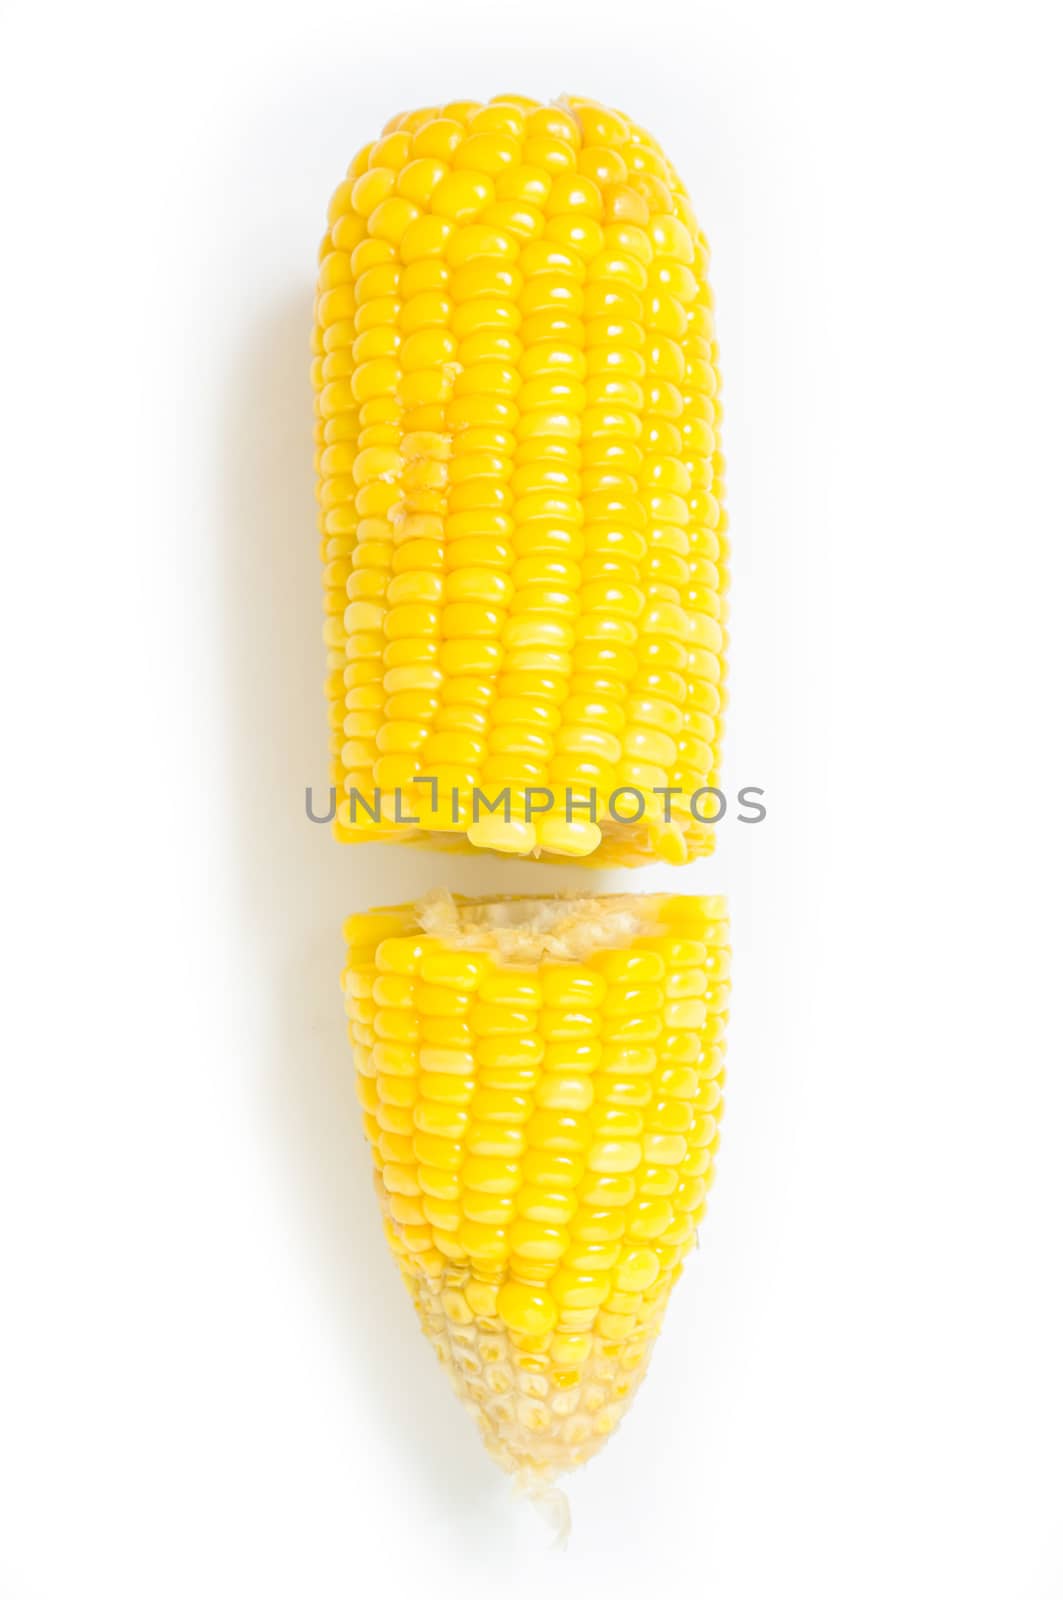 Boiled corn isolated on white background